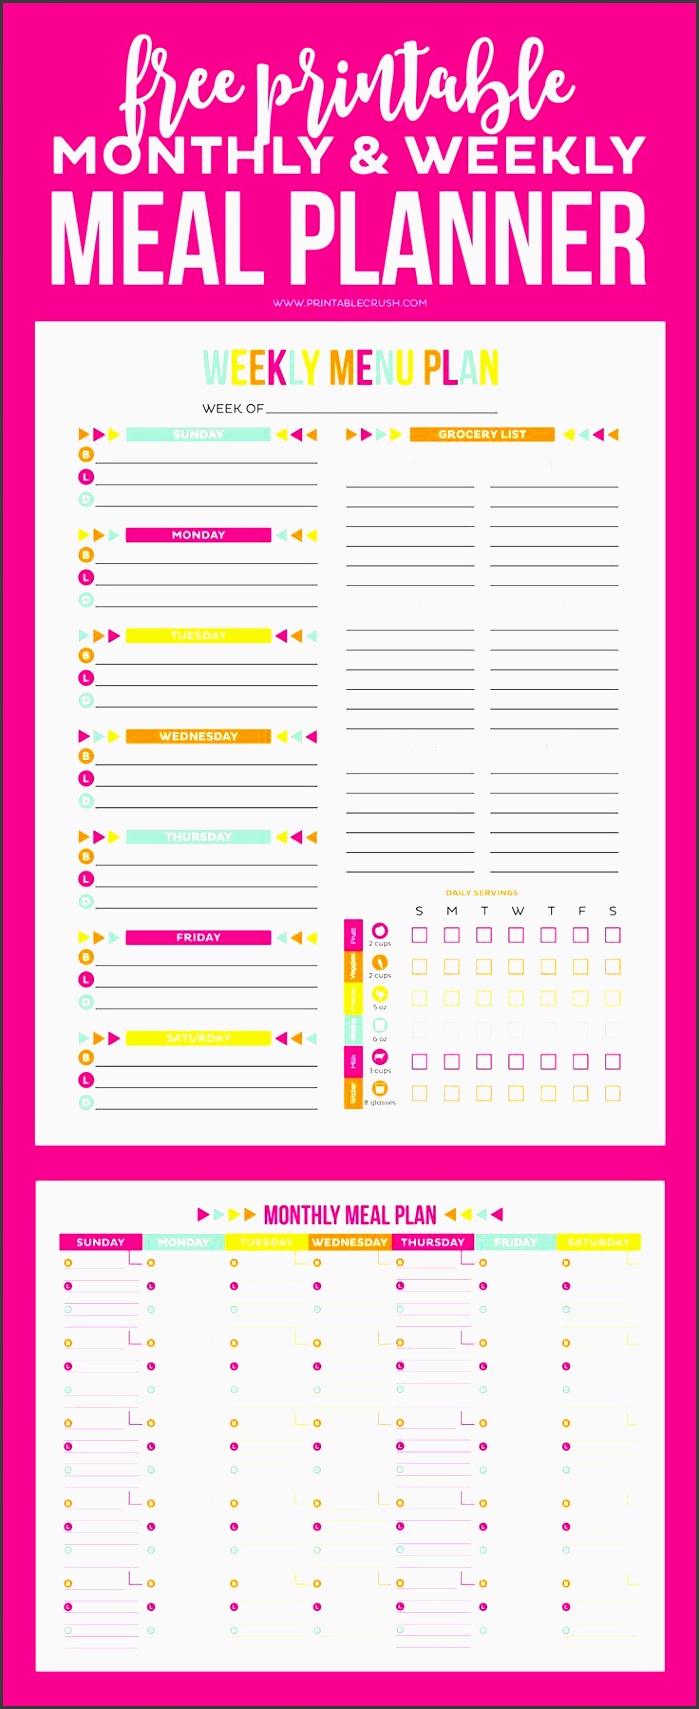 use this free printable meal planner to keep track of your menu plan and health goals